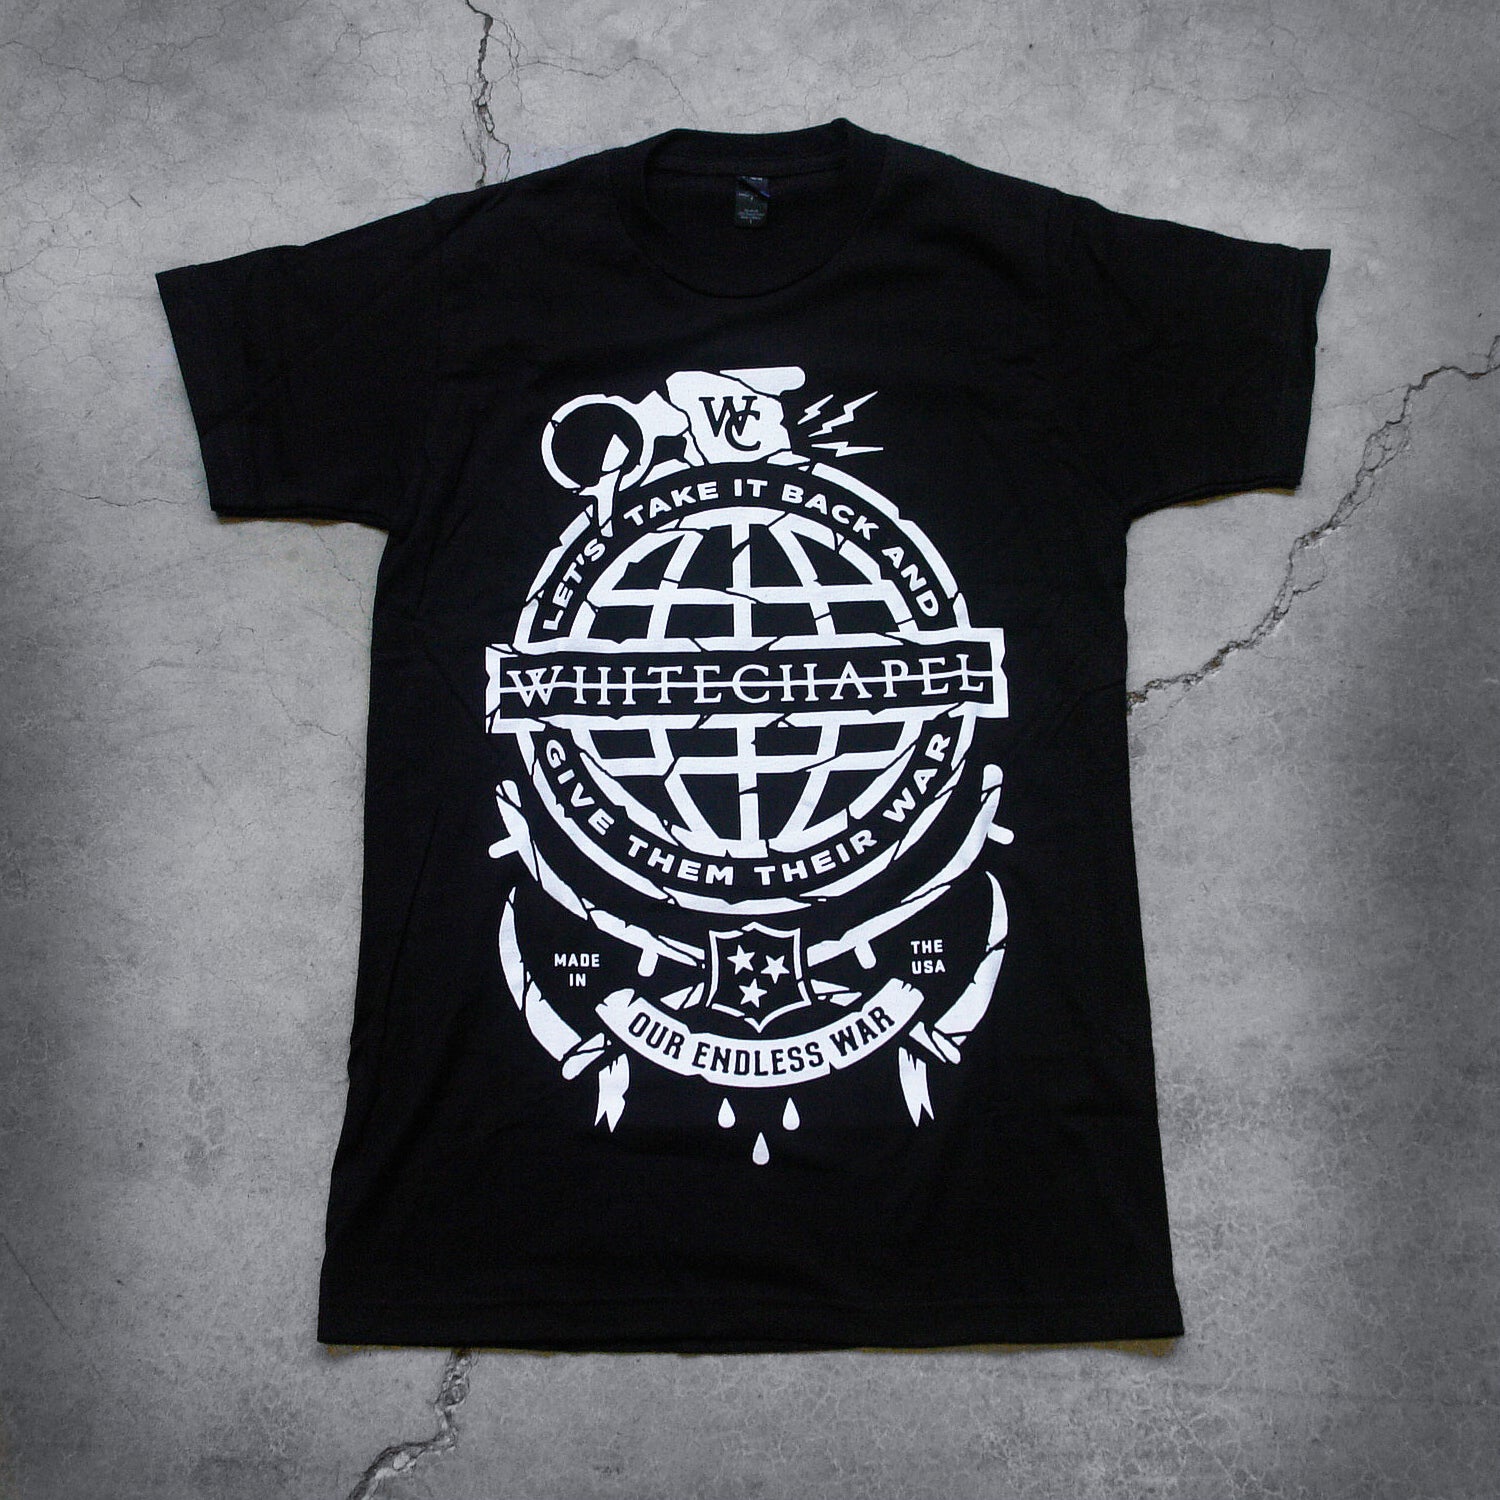 Image of the front of a black tshirt against a grey concrete background. There is a graphic of a white grenade and in there is a globe in the center of it with the text 